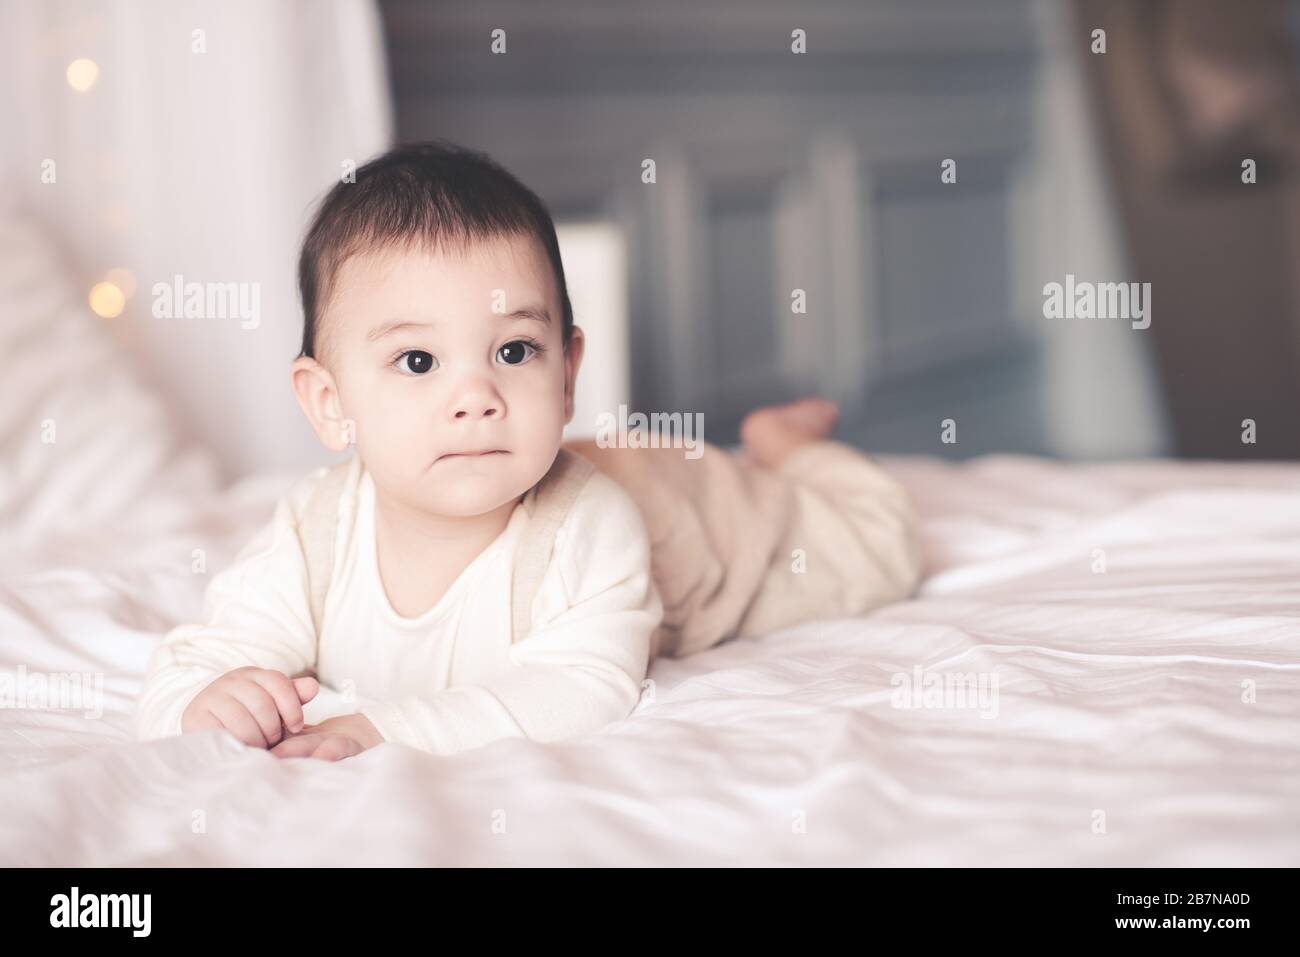 Cute baby boy under 1 year old crawling in bed closeup. Looking ...